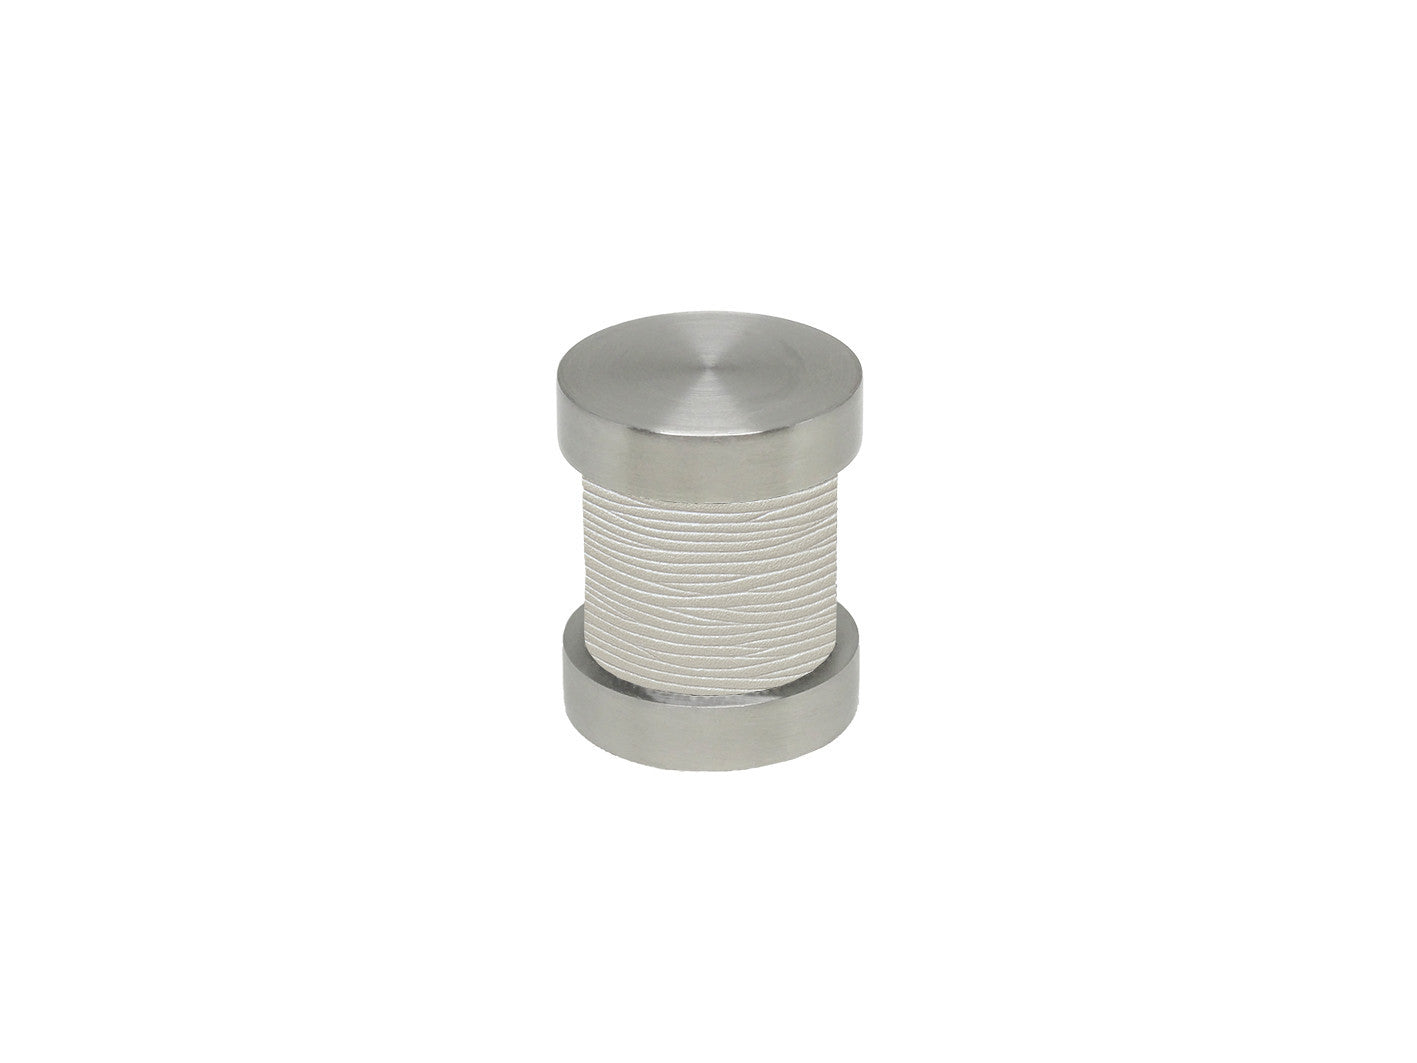 Opalite white groove finial | Walcot House 30mm stainless steel collection